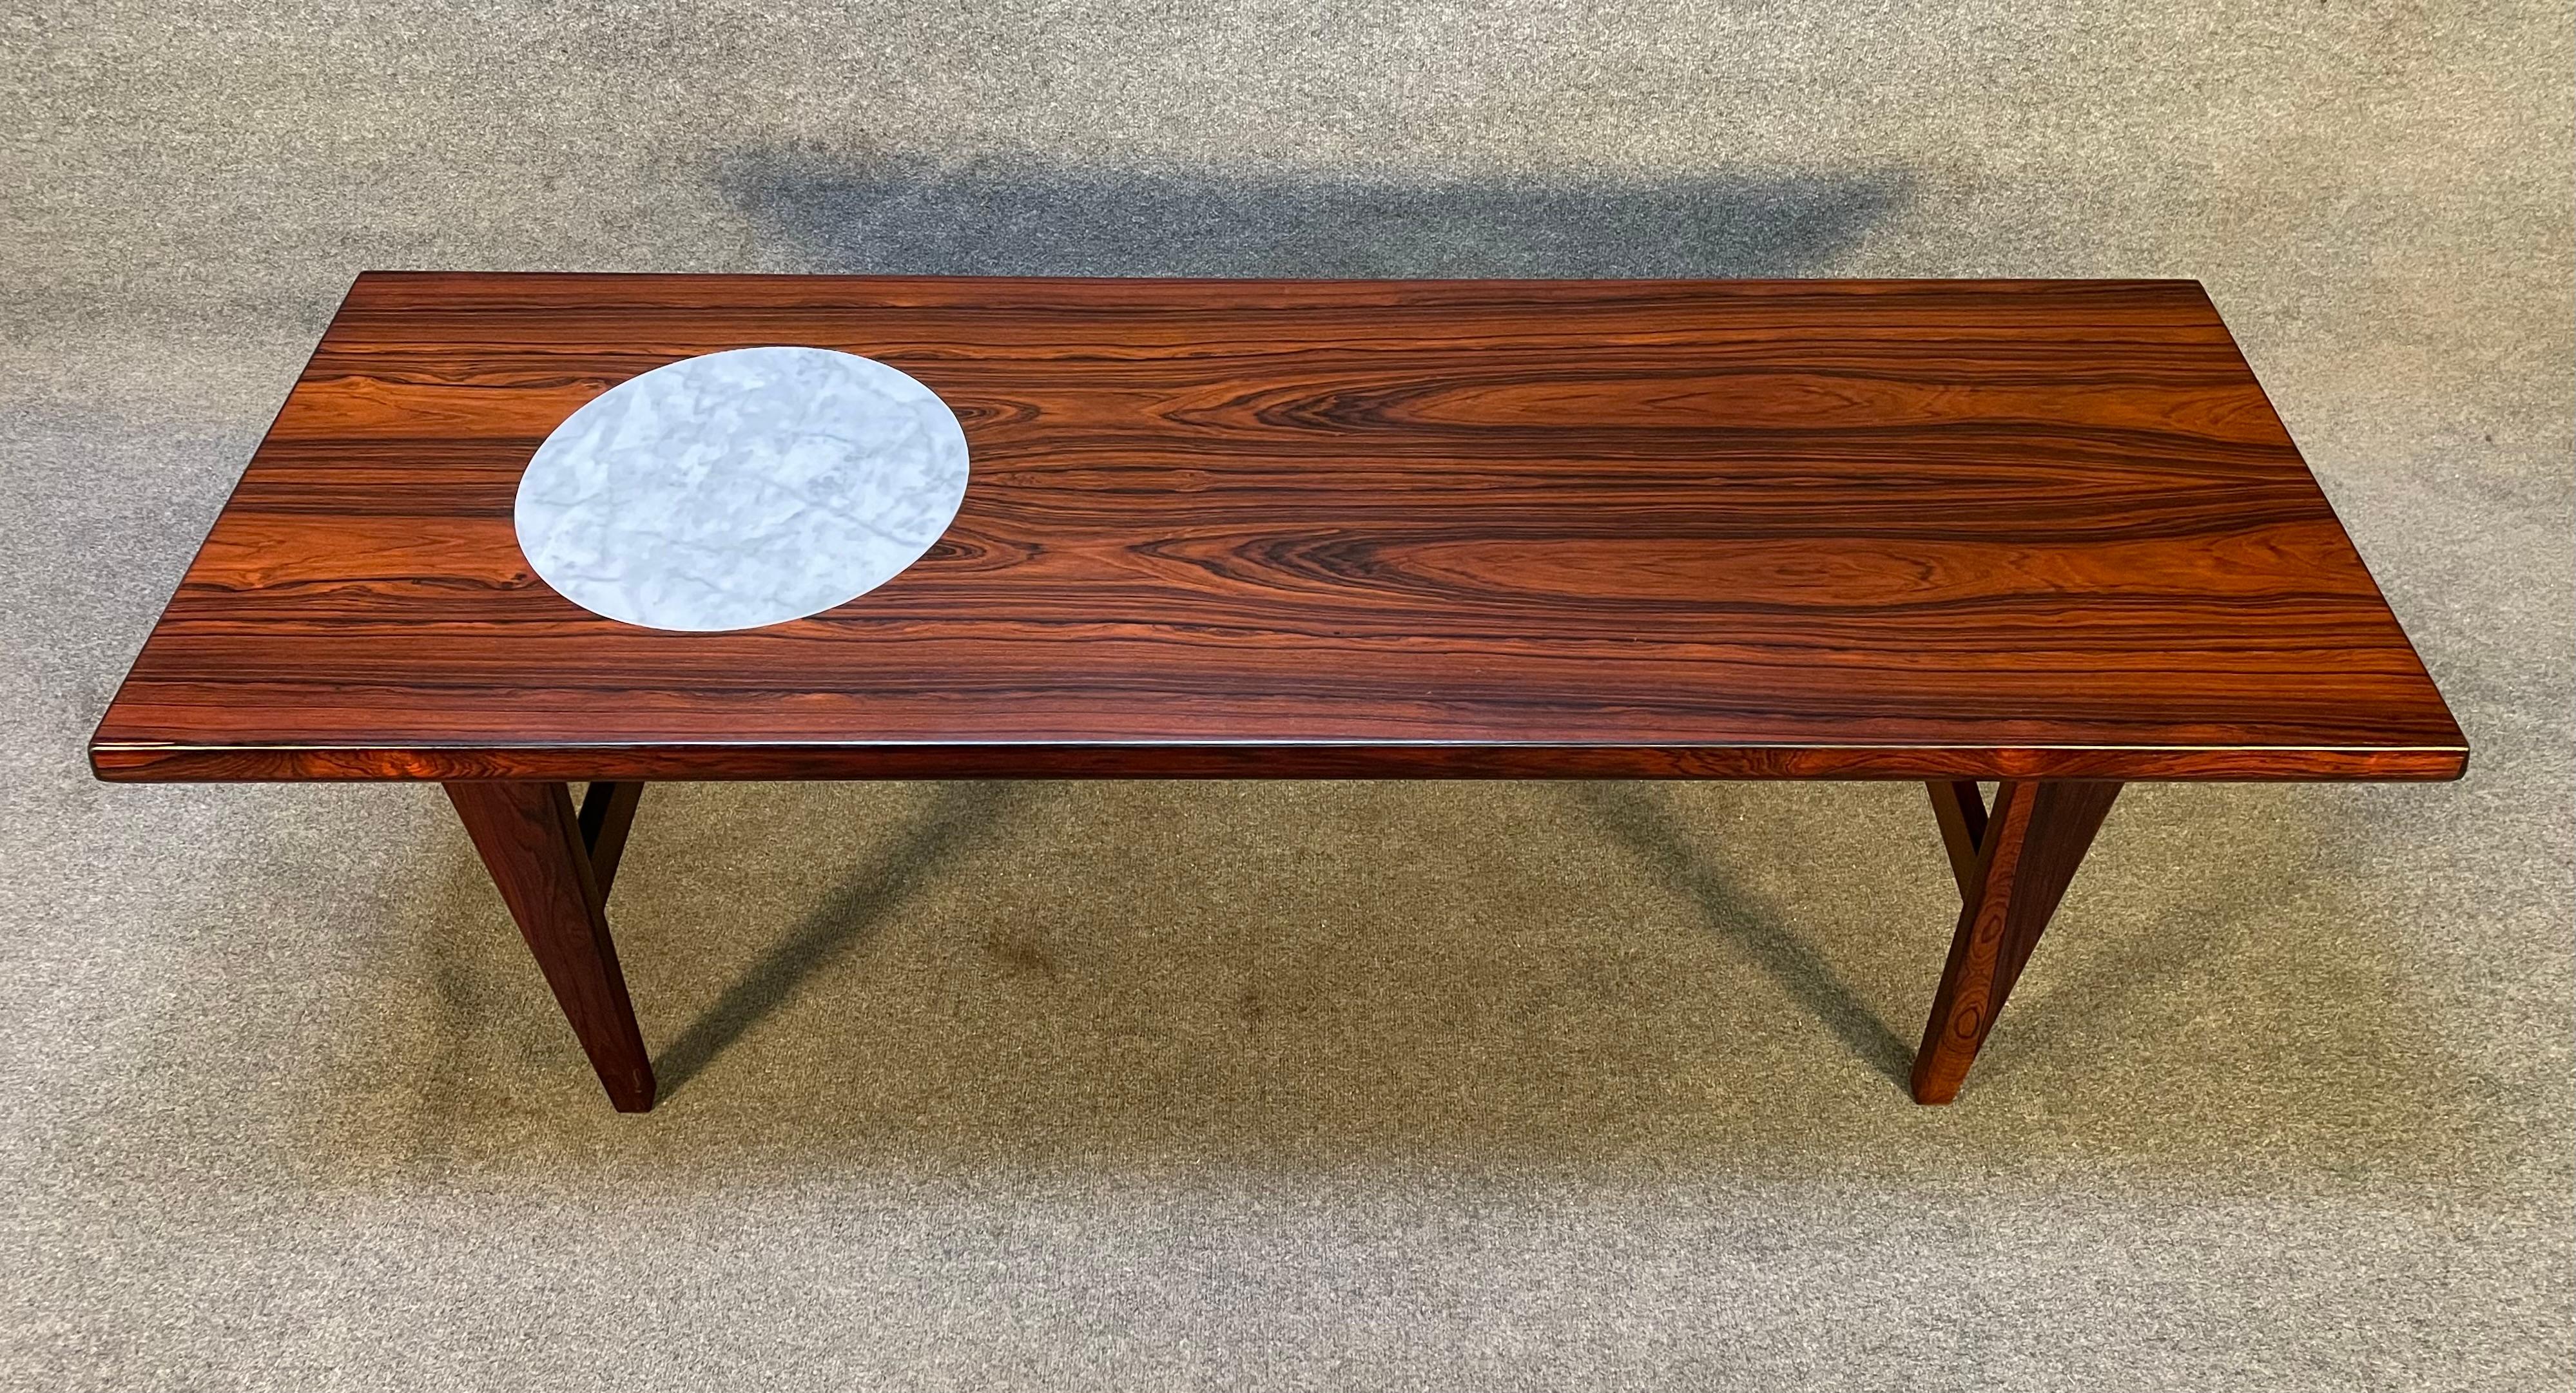 Here is a beautiful 1960's scandinavian modern cocktail table in rosewood manufactured in Denmark recently imported to California before its refinishing.
This special table features a vibrant wood grain, a white marble insert and four sculptural